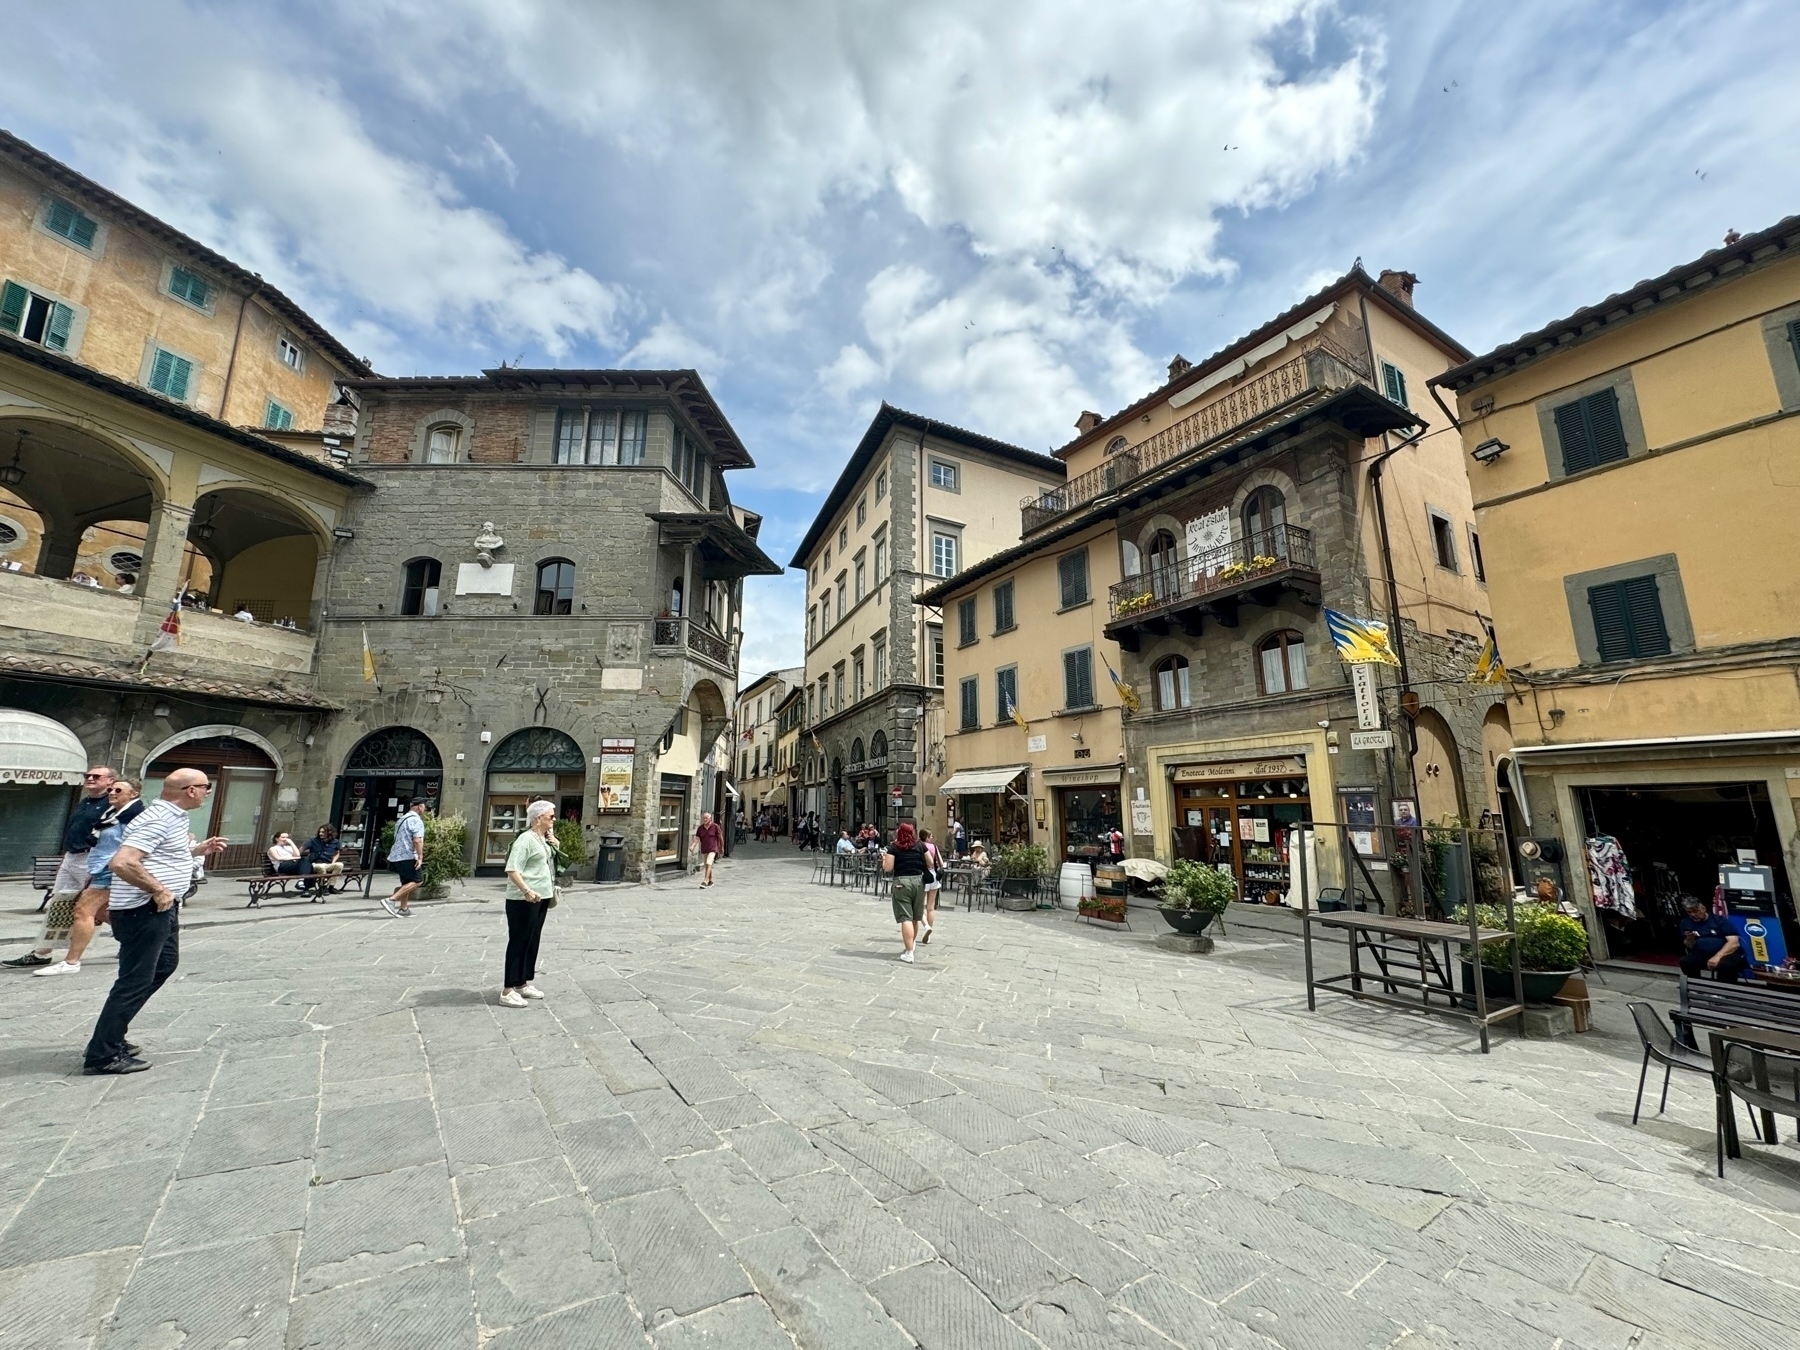 A charming town square with historic buildings and rustic architecture. People stroll and sit at outdoor tables, enjoying the atmosphere. The square is paved with stone tiles, and the buildings feature arched doorways, balconies, and shops at ground level.